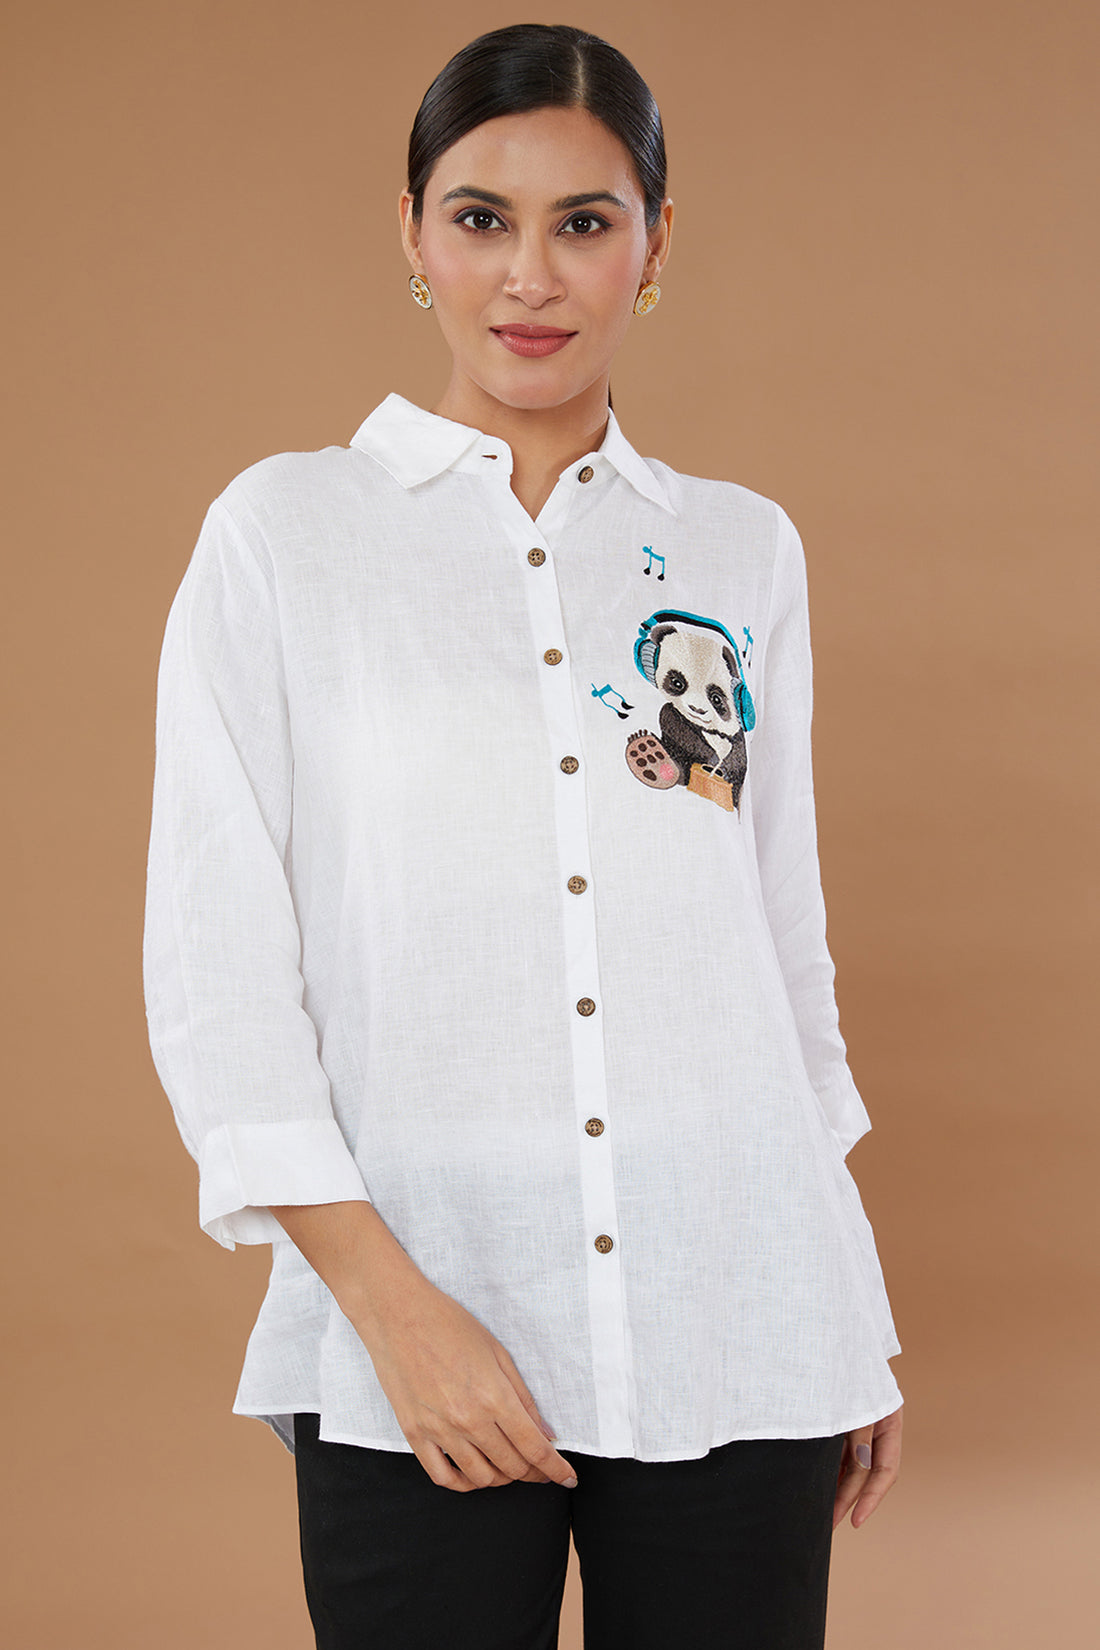 White Pure Linen Embroidered Shirt With Panda Hand Embroidery